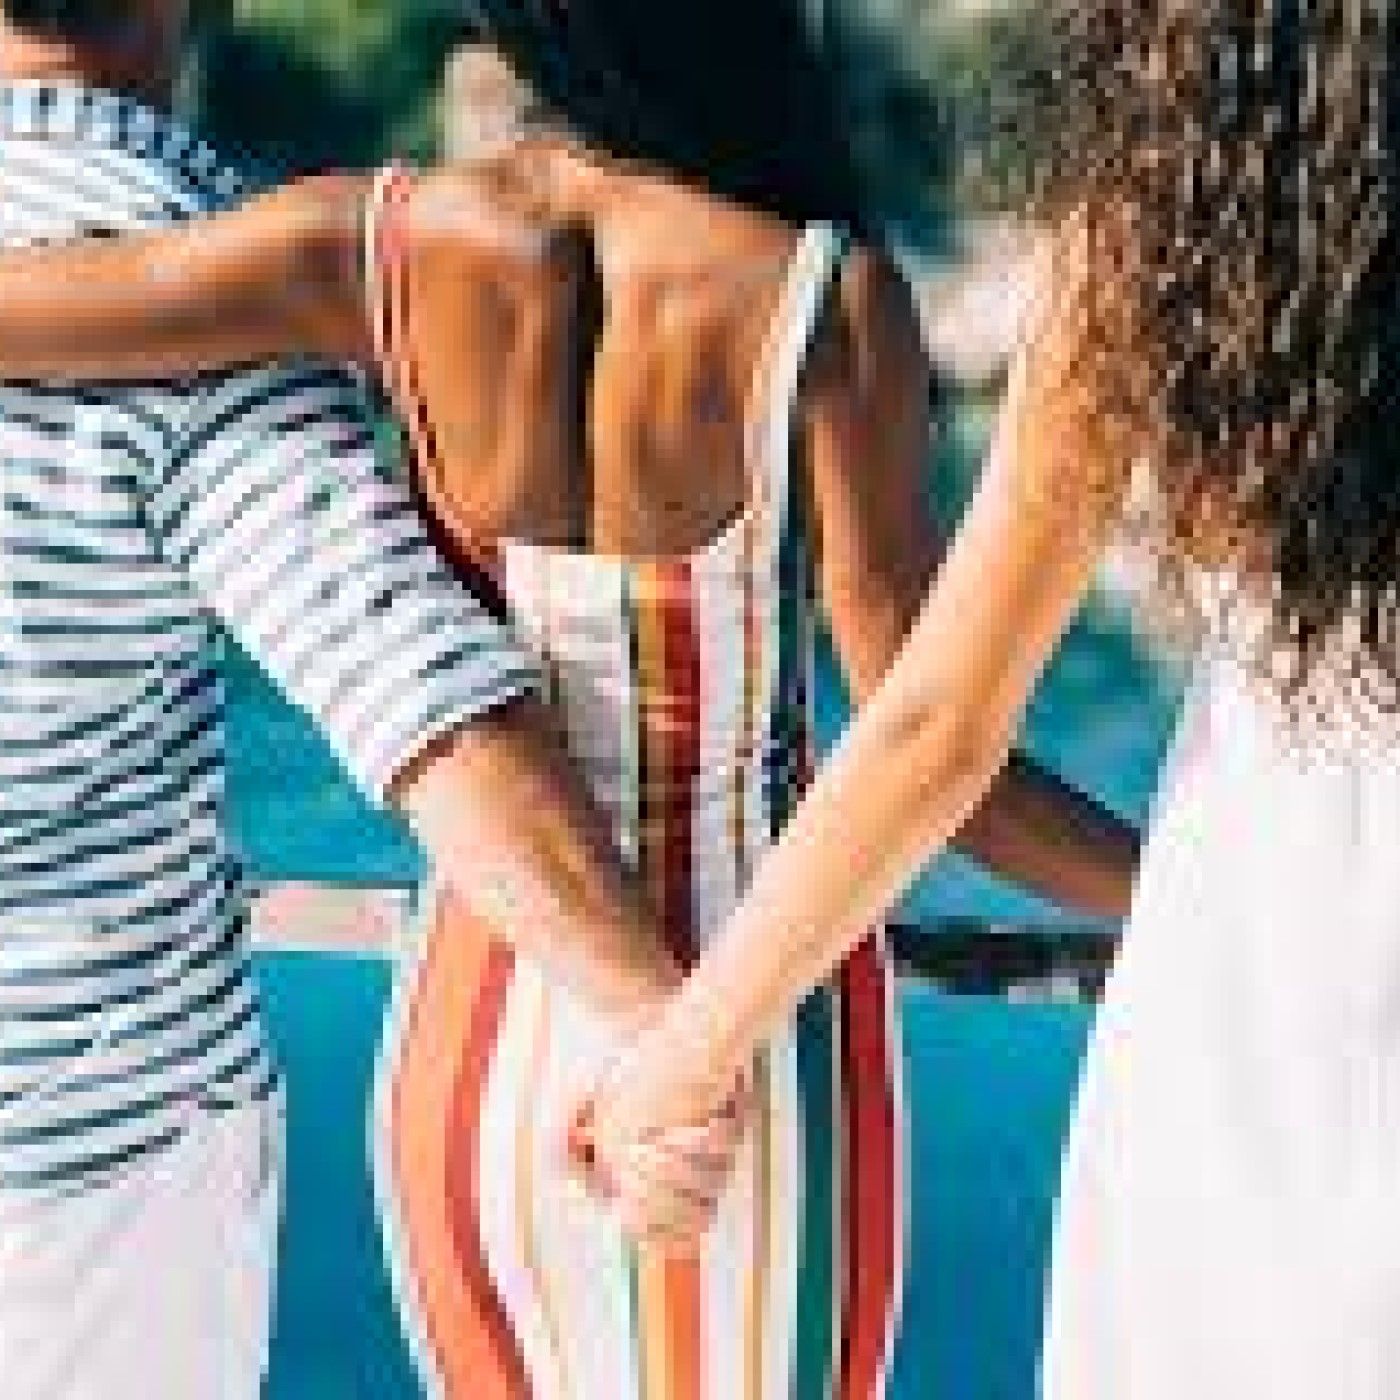 Polyamory – who and what is it